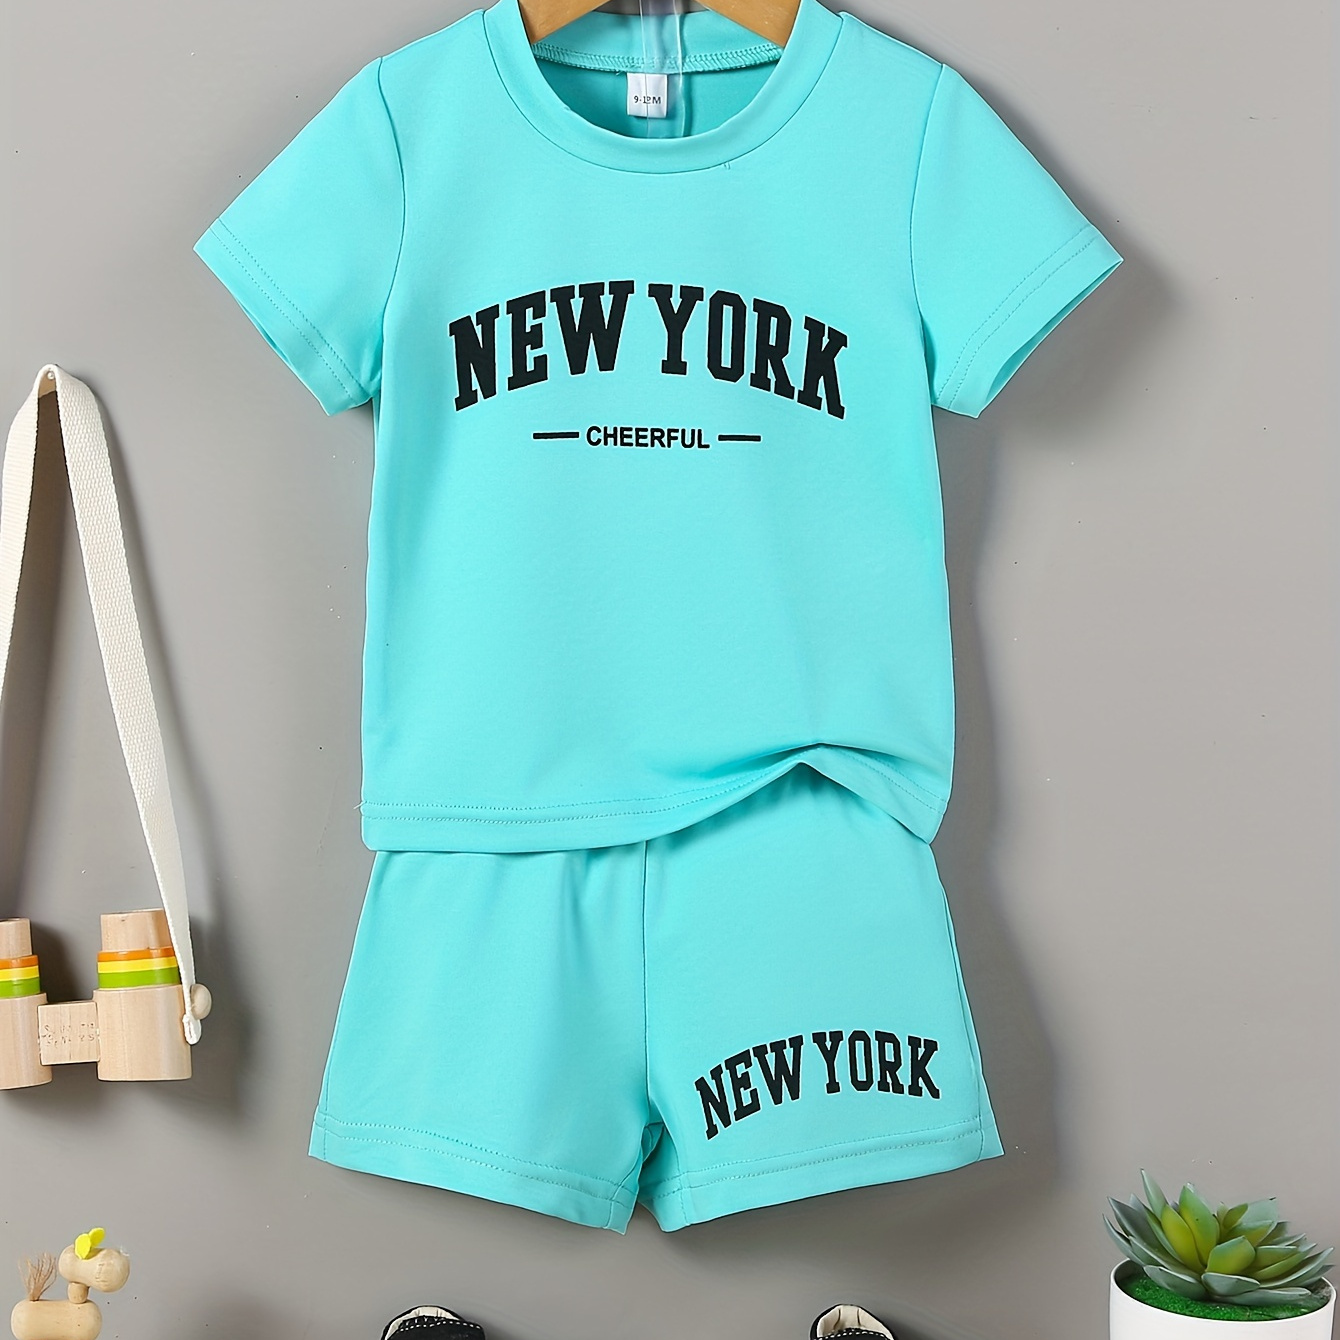 

Baby Boys 2-piece Set, Casual Style Letter Print T-shirt And Shorts, Turquoise, Fashionable Summer Outfit